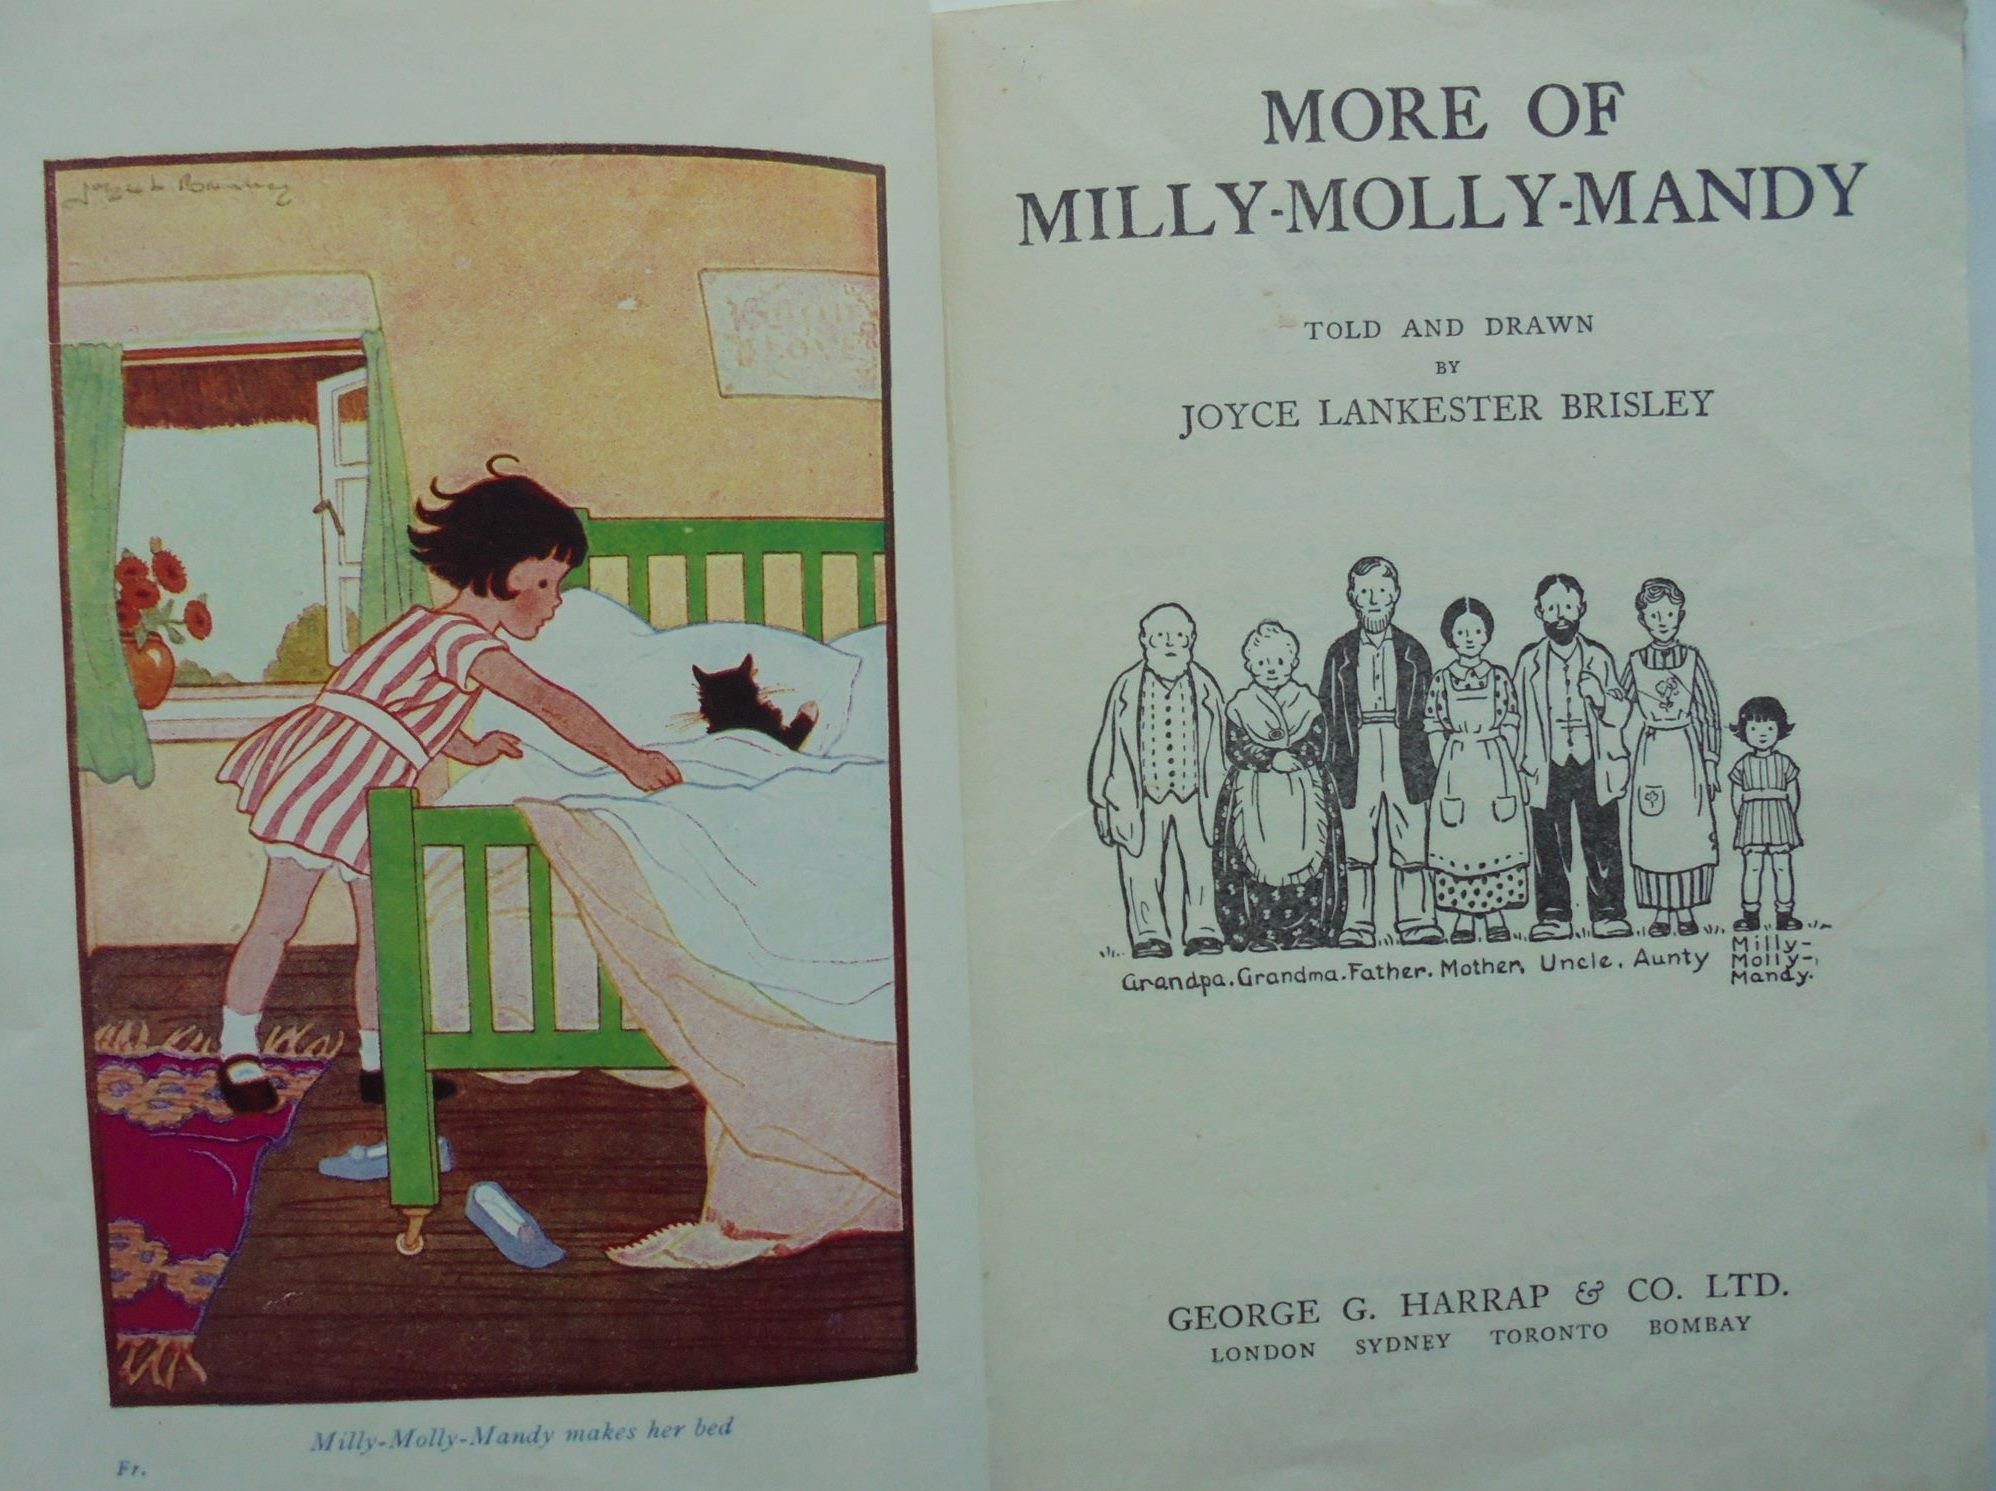 More of Milly-Molly-Mandy by Joyce Lankester Brisley.